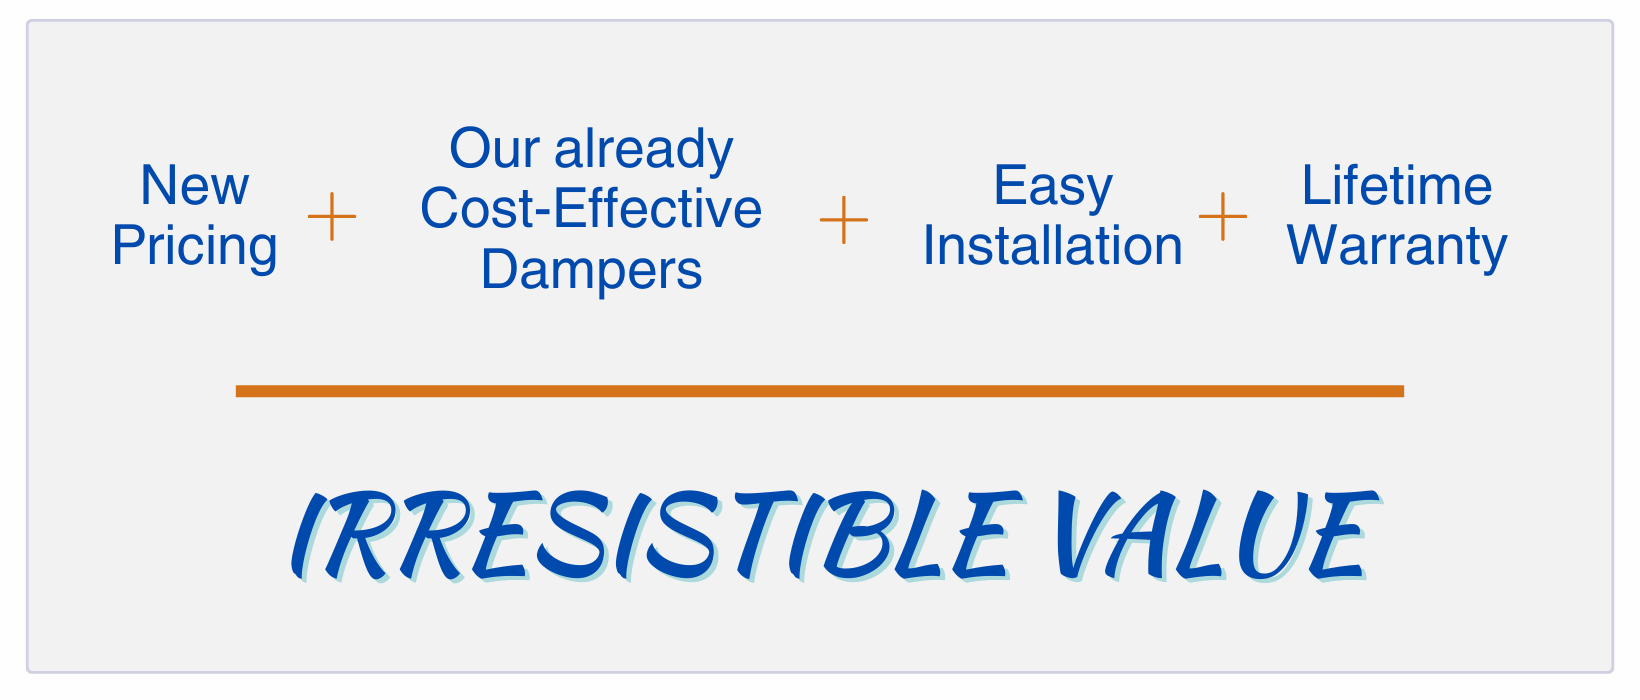 New Pricing plus Our already Cost-Effective Dampers plus Easy Installation plus Lifetime Warranty equals Irresistible Value